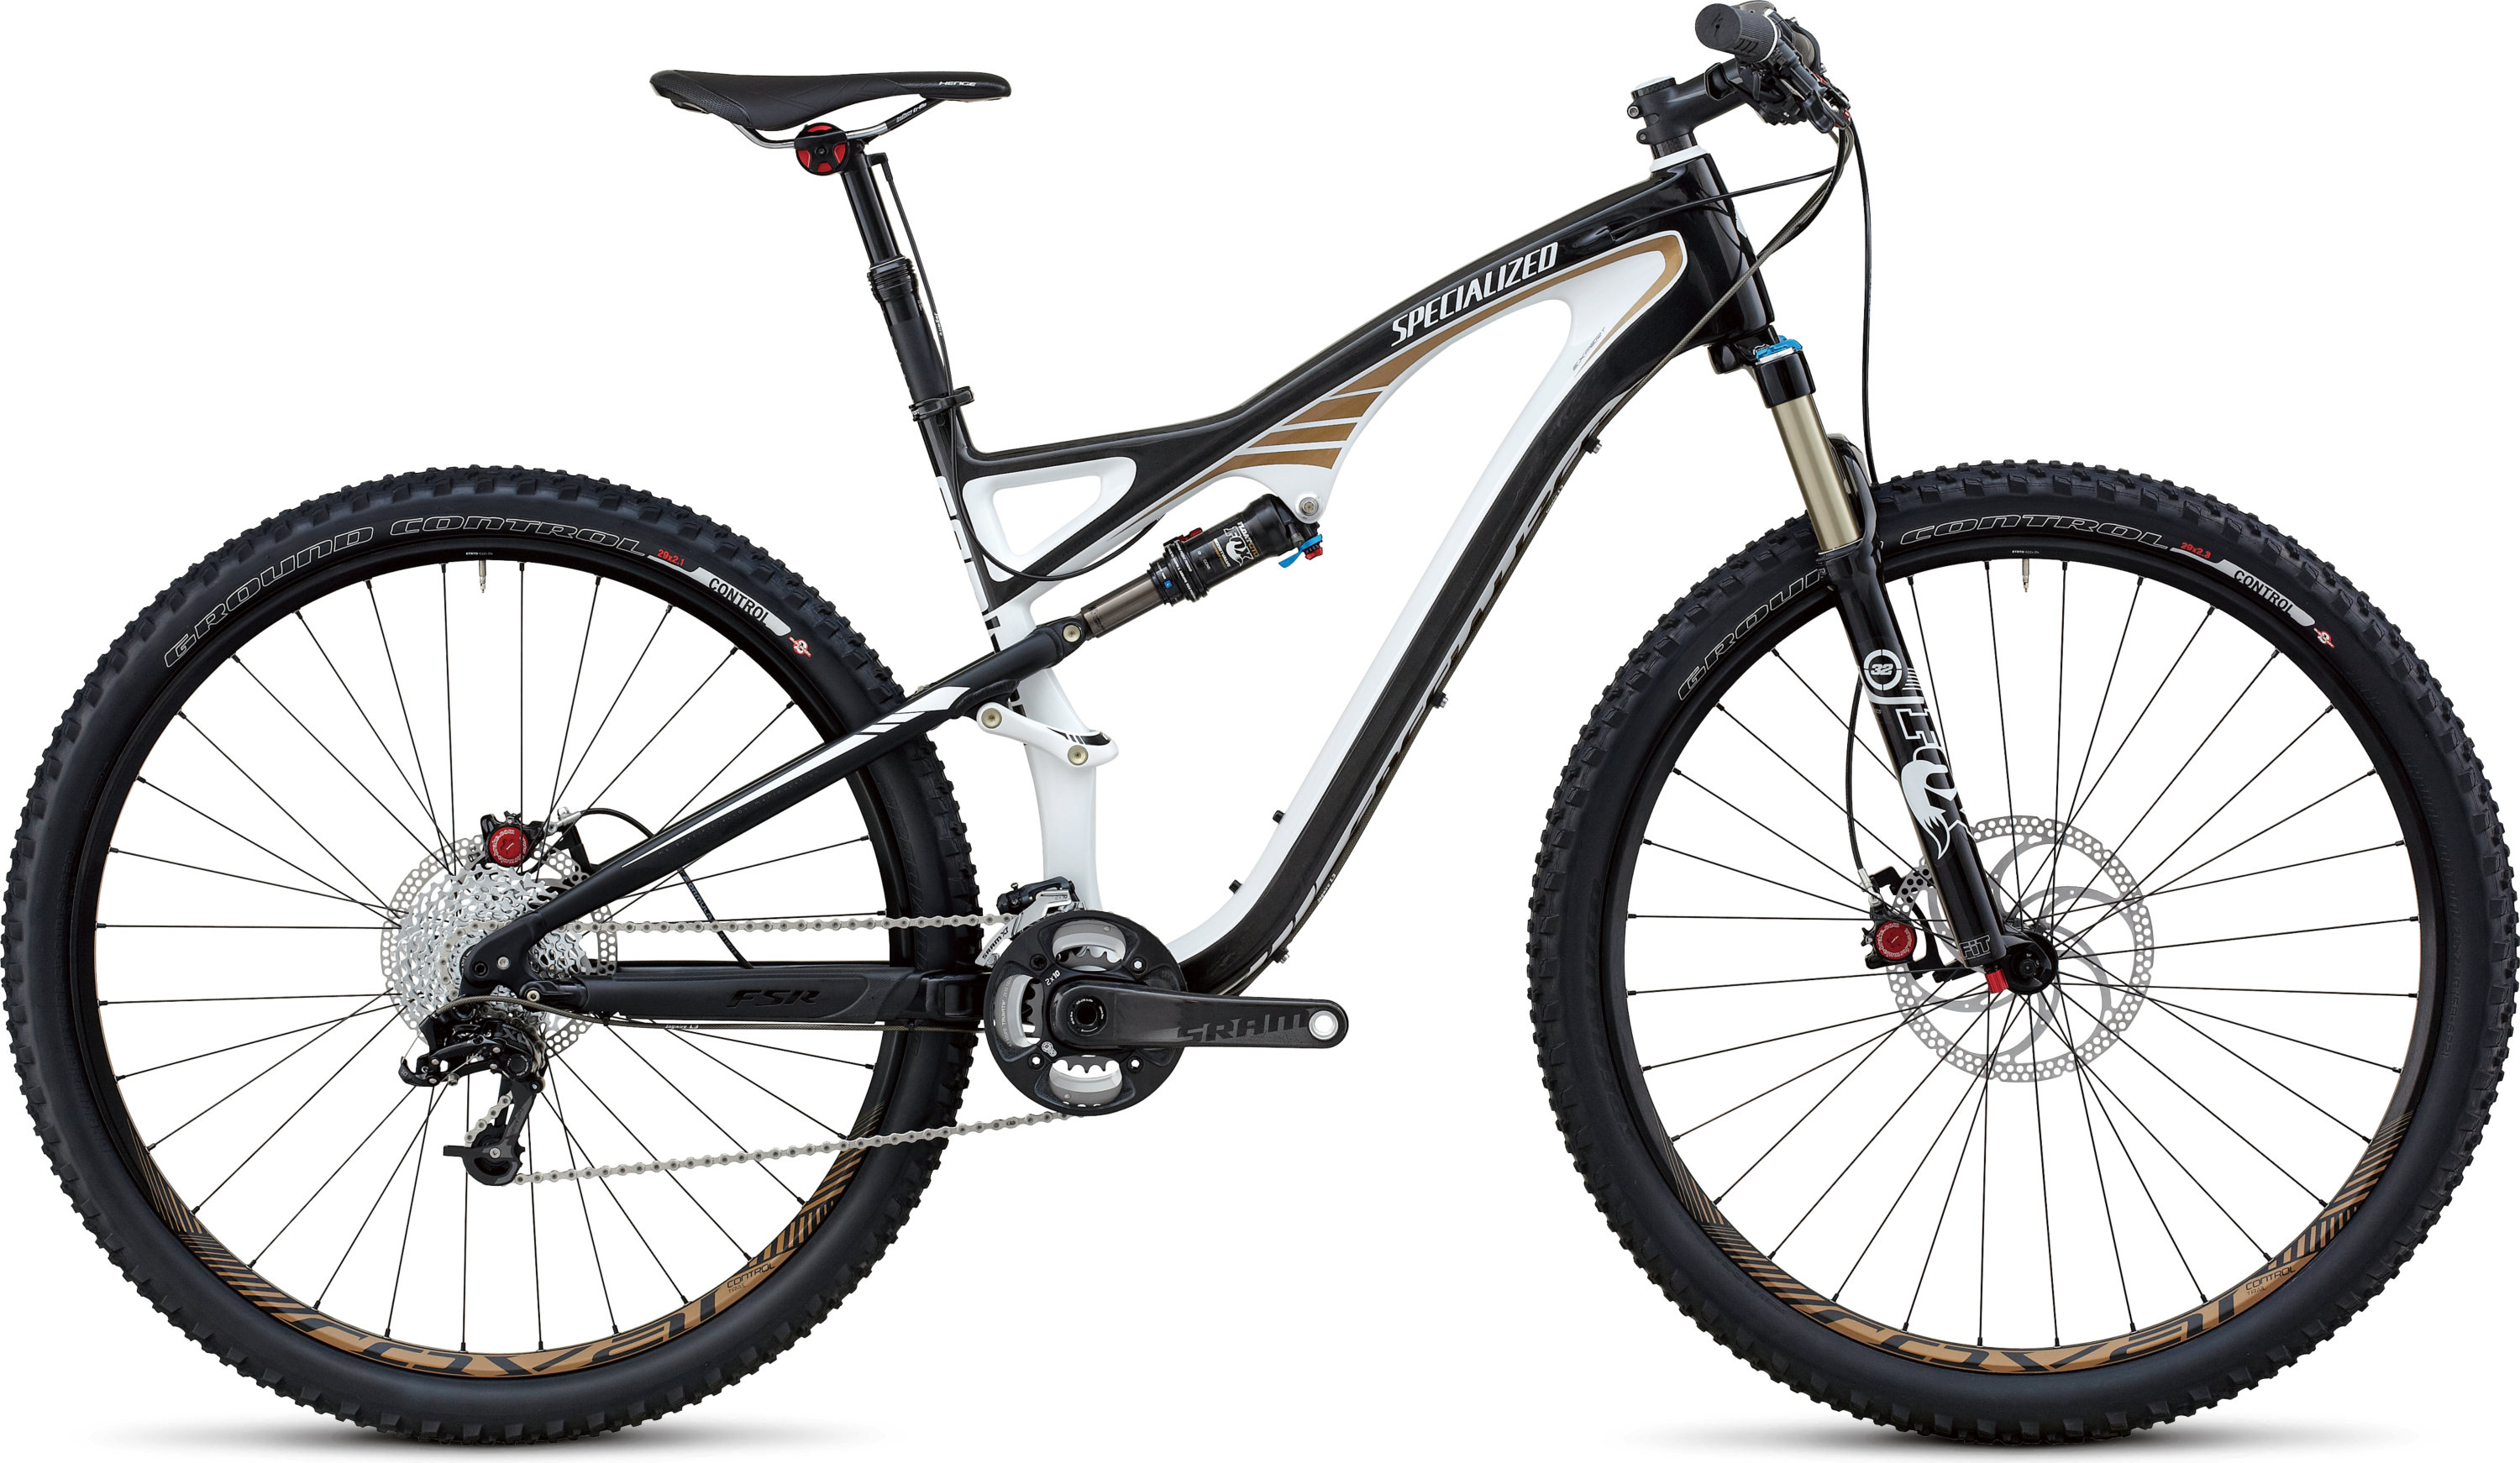 specialized camber comp 2013